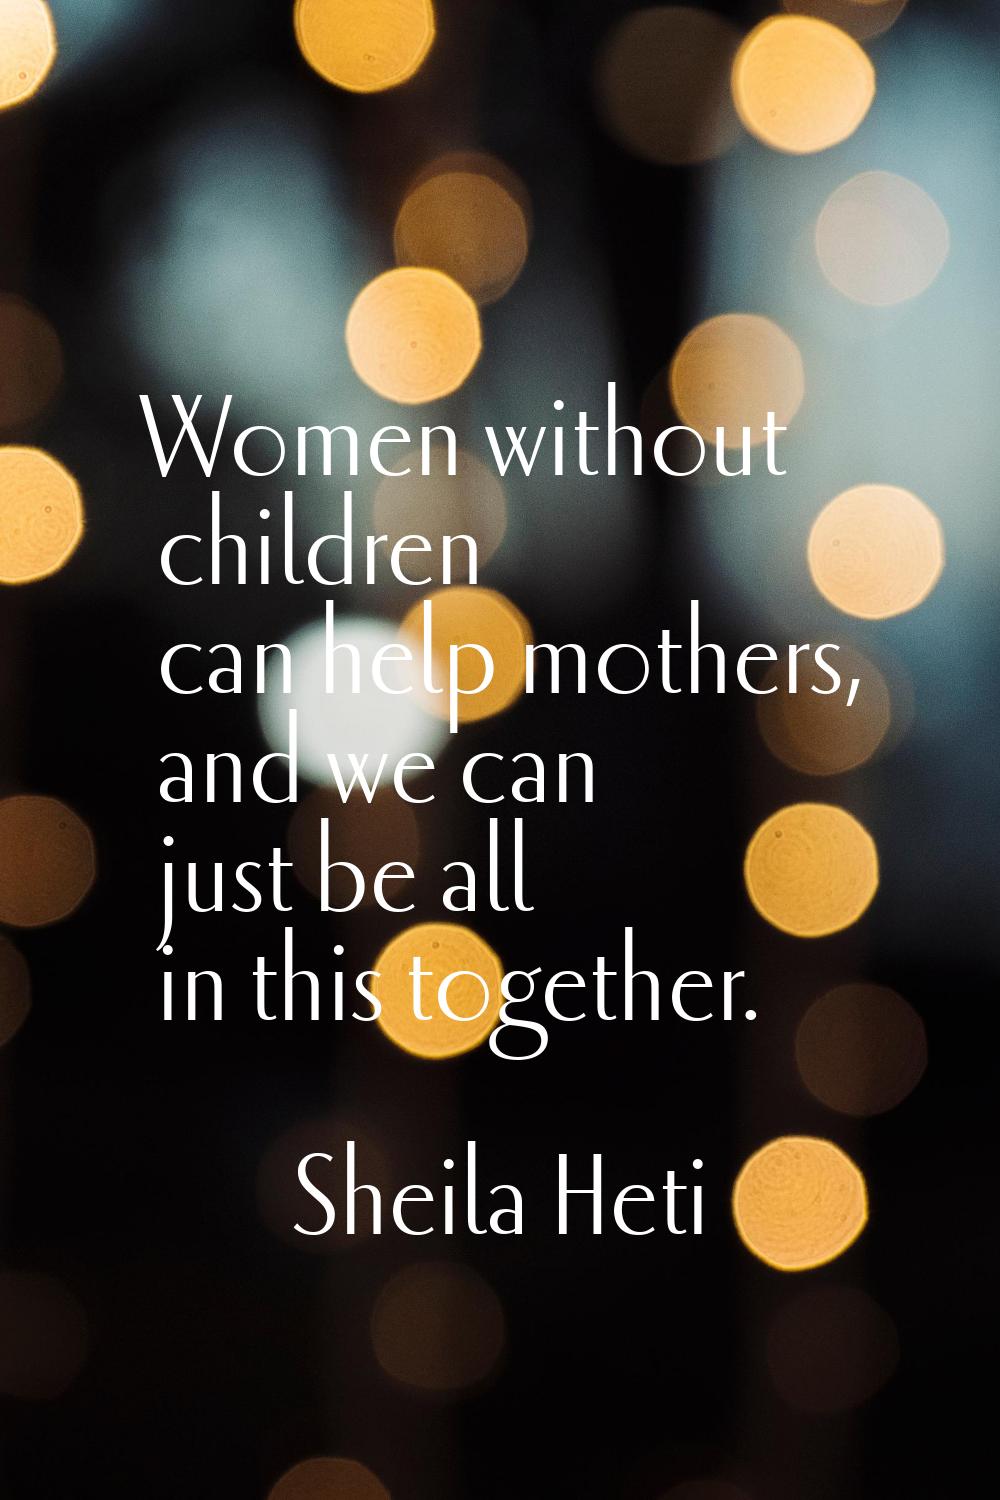 Women without children can help mothers, and we can just be all in this together.